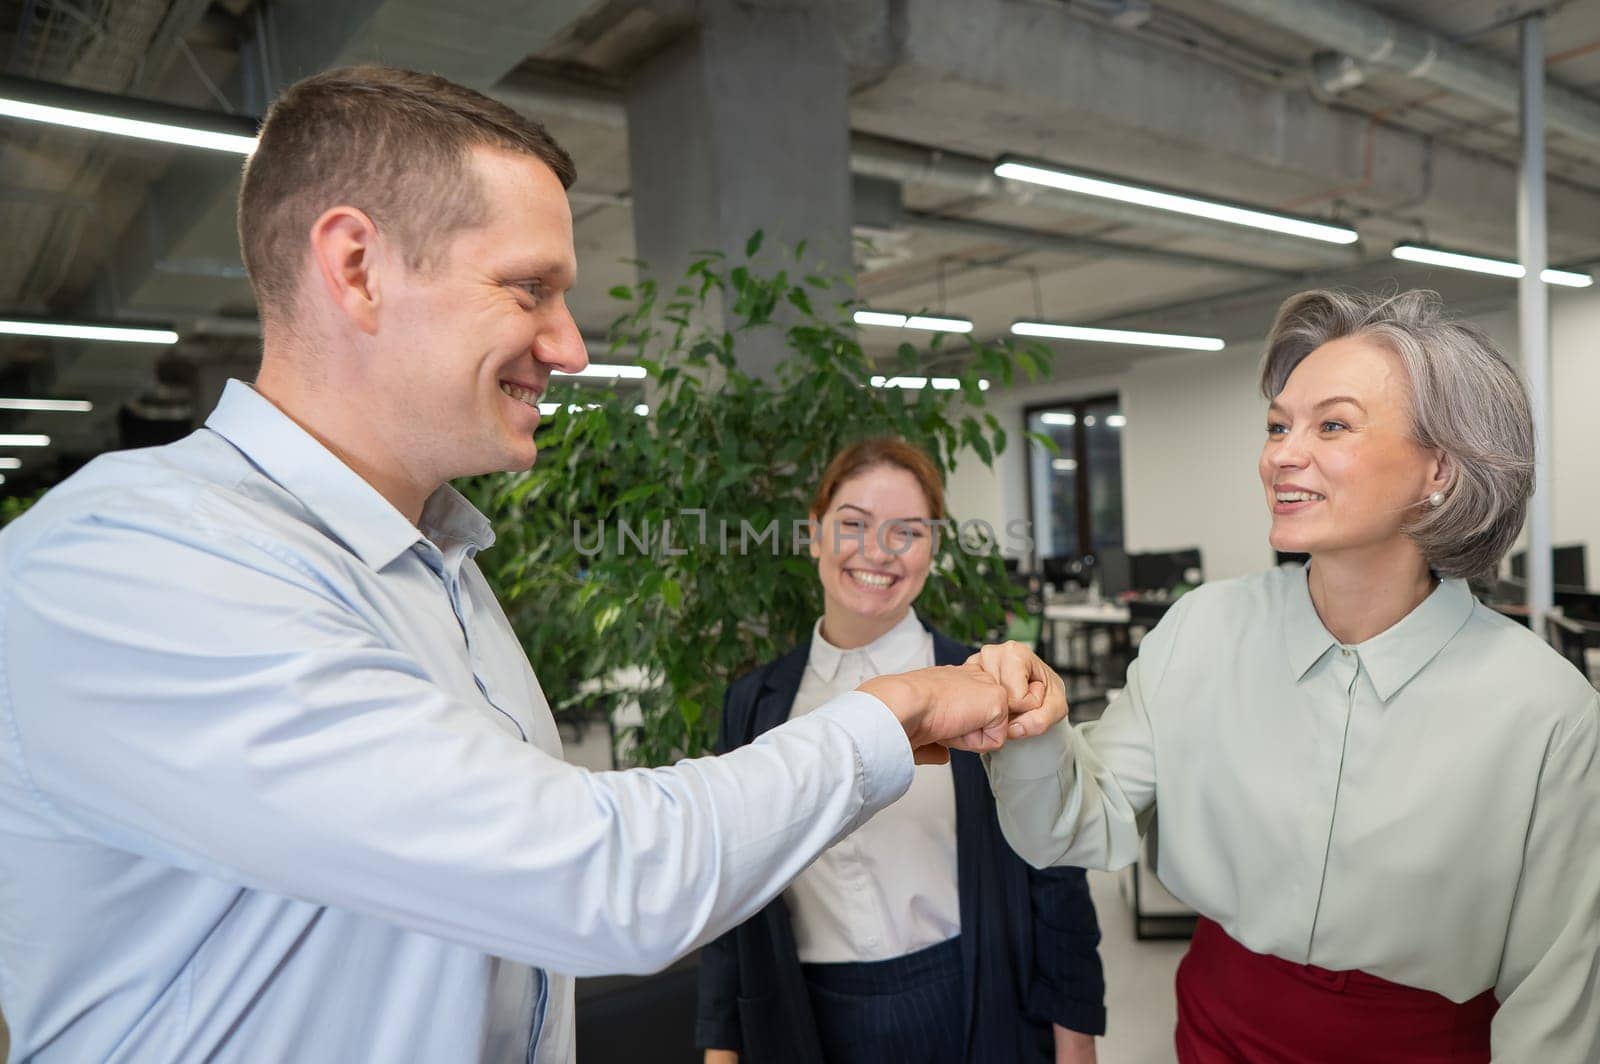 Caucasian man bumping his fists with colleagues as a sign of success. by mrwed54